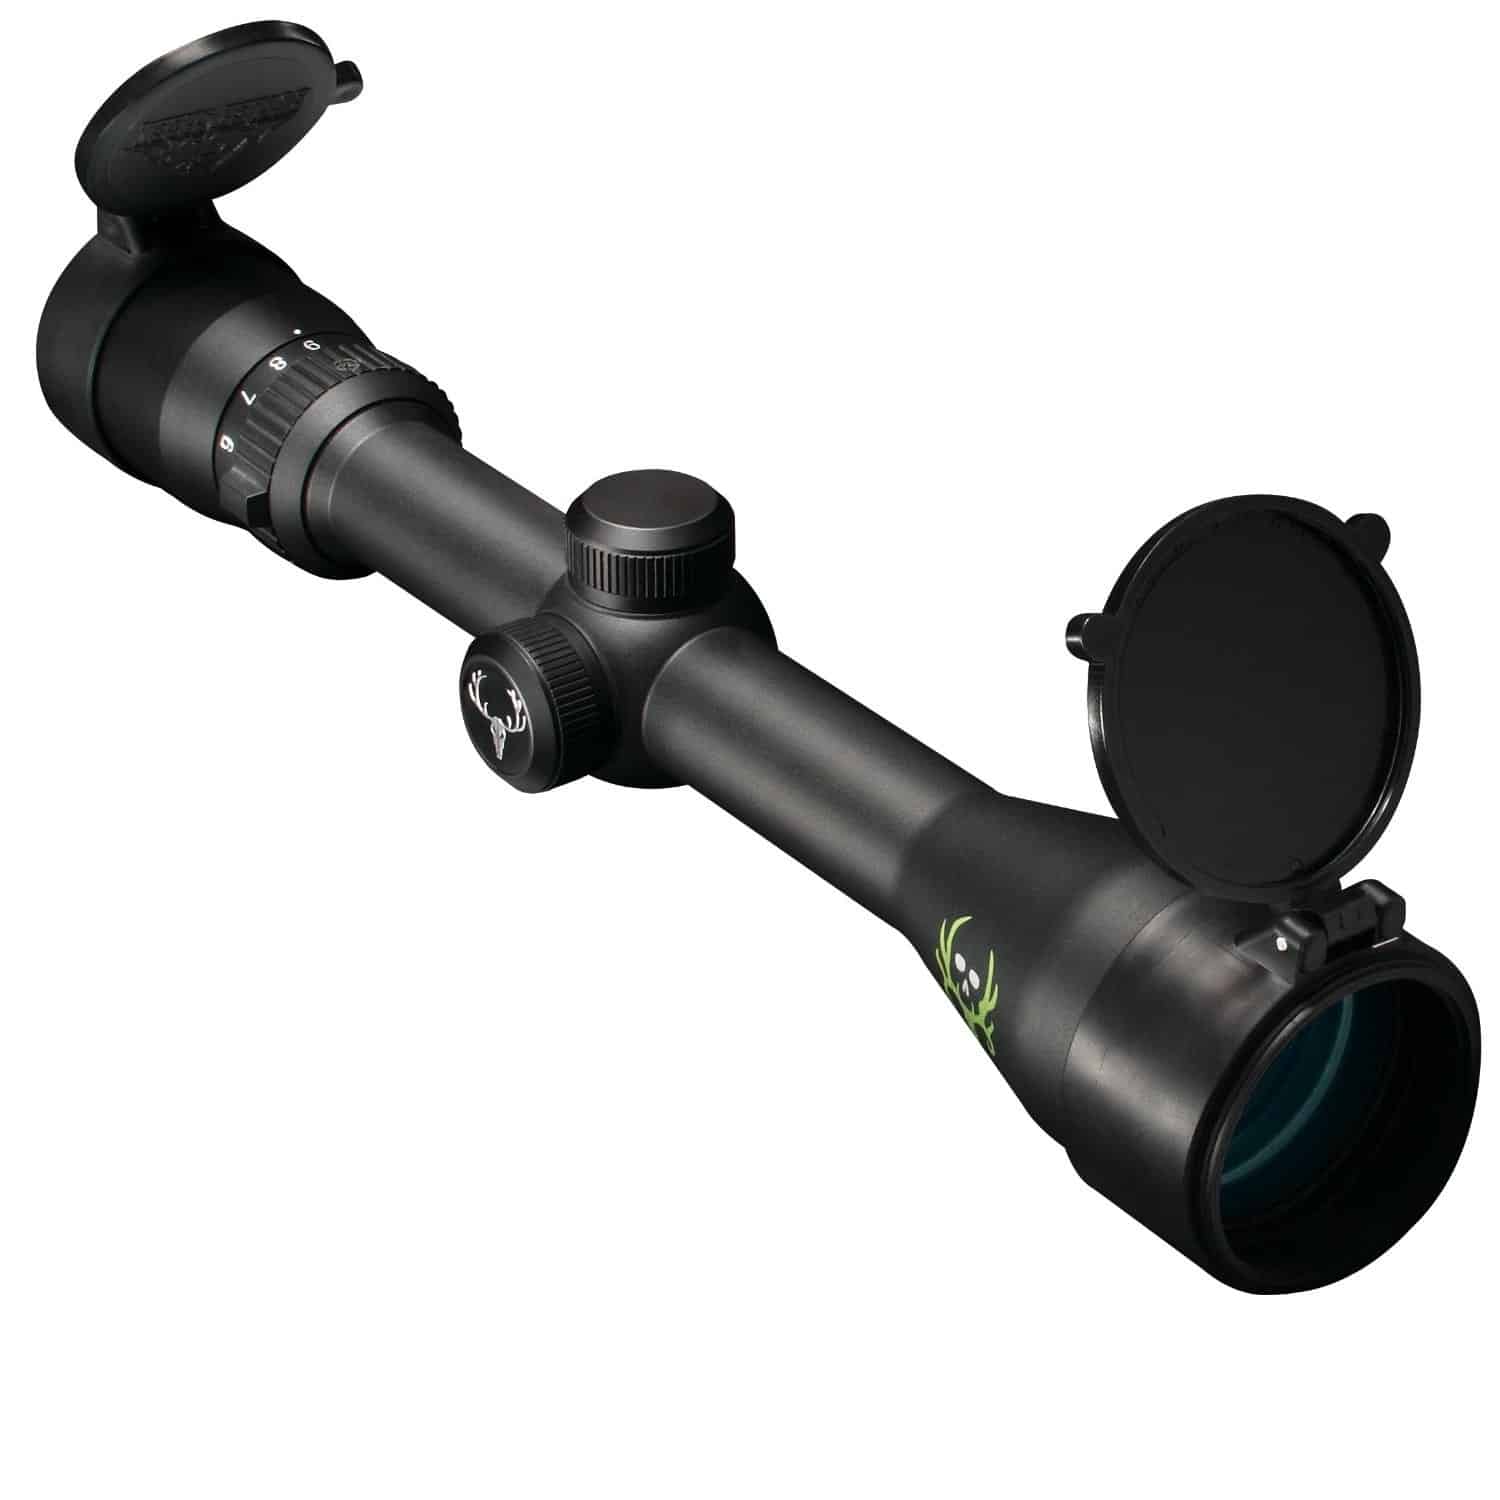 Where Are Bushnell Scopes Made